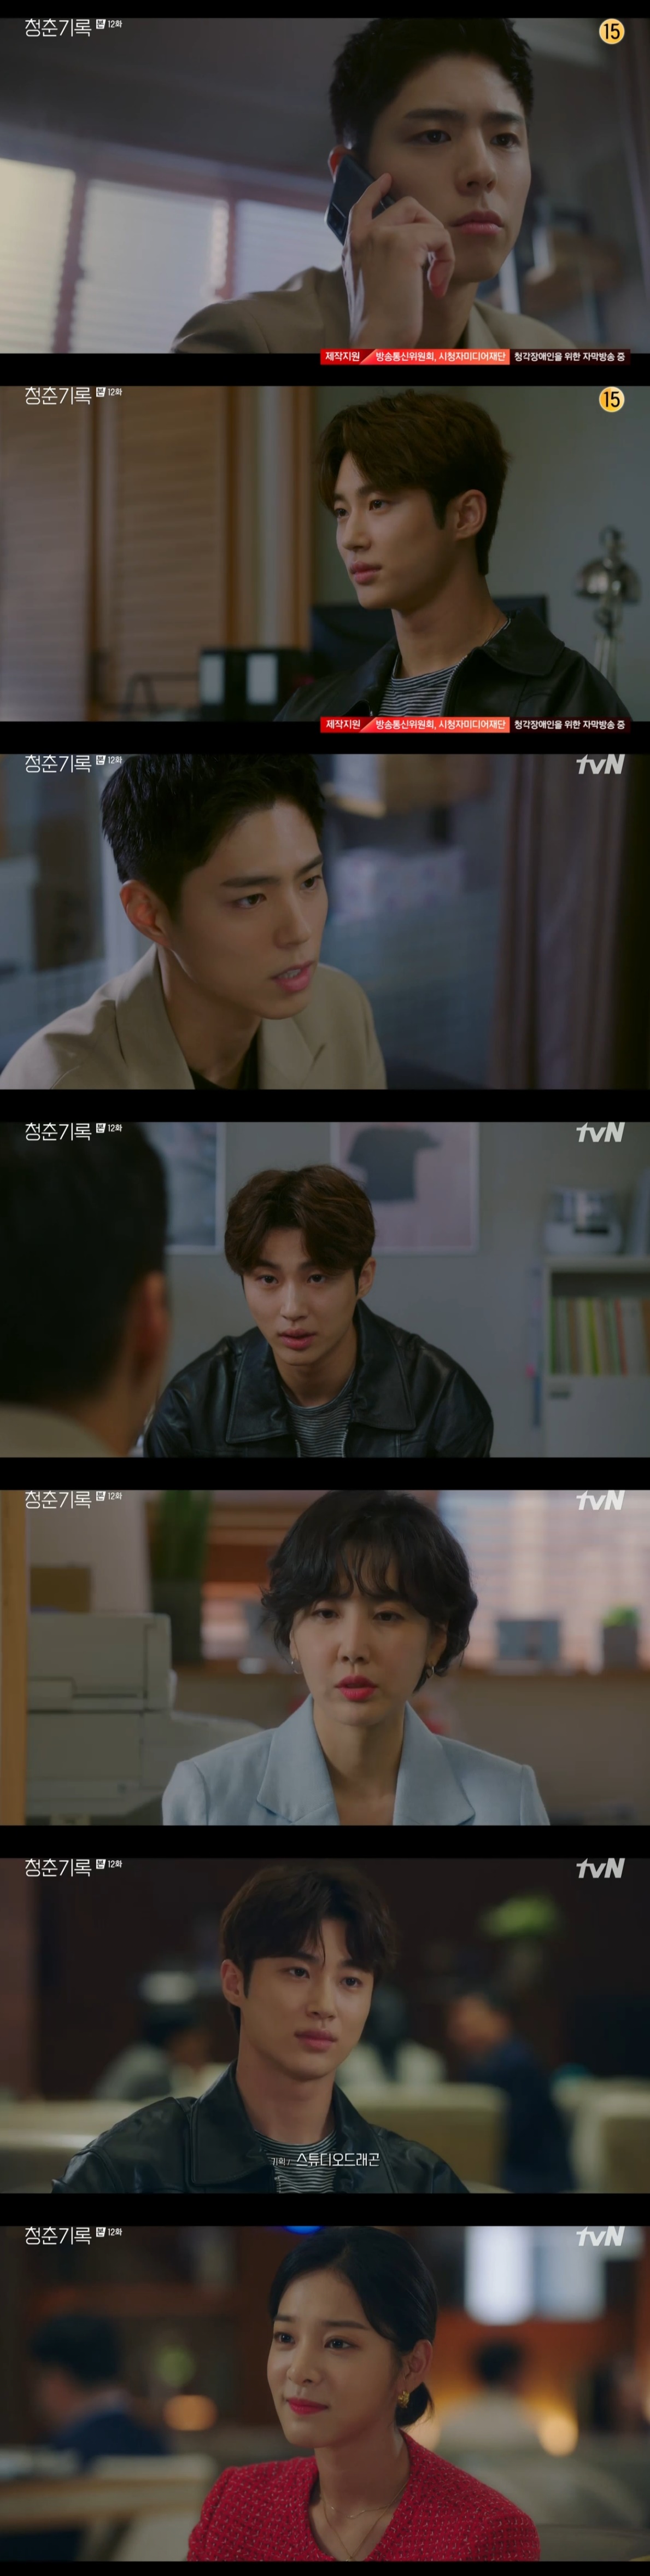 The Record of Youth Park Bo-gum and Byeon Wooseok argued.In the TVN drama Record of Youth broadcast on the 13th, Sa Hye-joon (Park Bo-gum) and Byeon Wooseok (Byo-seok) argued.But Hye-joon disapproved of the fact that he had brought Jia in, saying, There is something that is helpful and not.If it was the former Sa Hye-joon, I would have said thank you if you helped me with good faith. Hye-joon said, Why do you keep saying its old? Hae-hyo said, You are busy meeting your boss.In addition, Haehyo confessed that Hannah Jeter (Joe-Jeong) and Kim Qiao Zhenyu (Kwon Soo-hyun) were dating the day before.He asked, When did you know you were dating Qiao Zhenyu, Hannah Jeter? Hyejun asked, Did you know? And Haehyo said, You except me.Did you fool me?But Hye-joon left the room with a blurred end, saying, Im not deceived. Until Qiao Zhenyu tells me.Who is to be angry?Min Jae (Shin Dong-mi) said, You are decent. You fought with your fists when you watched movies. He then said, Thank Jia.On the other hand, TVN Wolhwa drama Record of Youth is a drama depicting the growth Record of Youth people who try to achieve their dreams and love without despairing on the wall of reality.